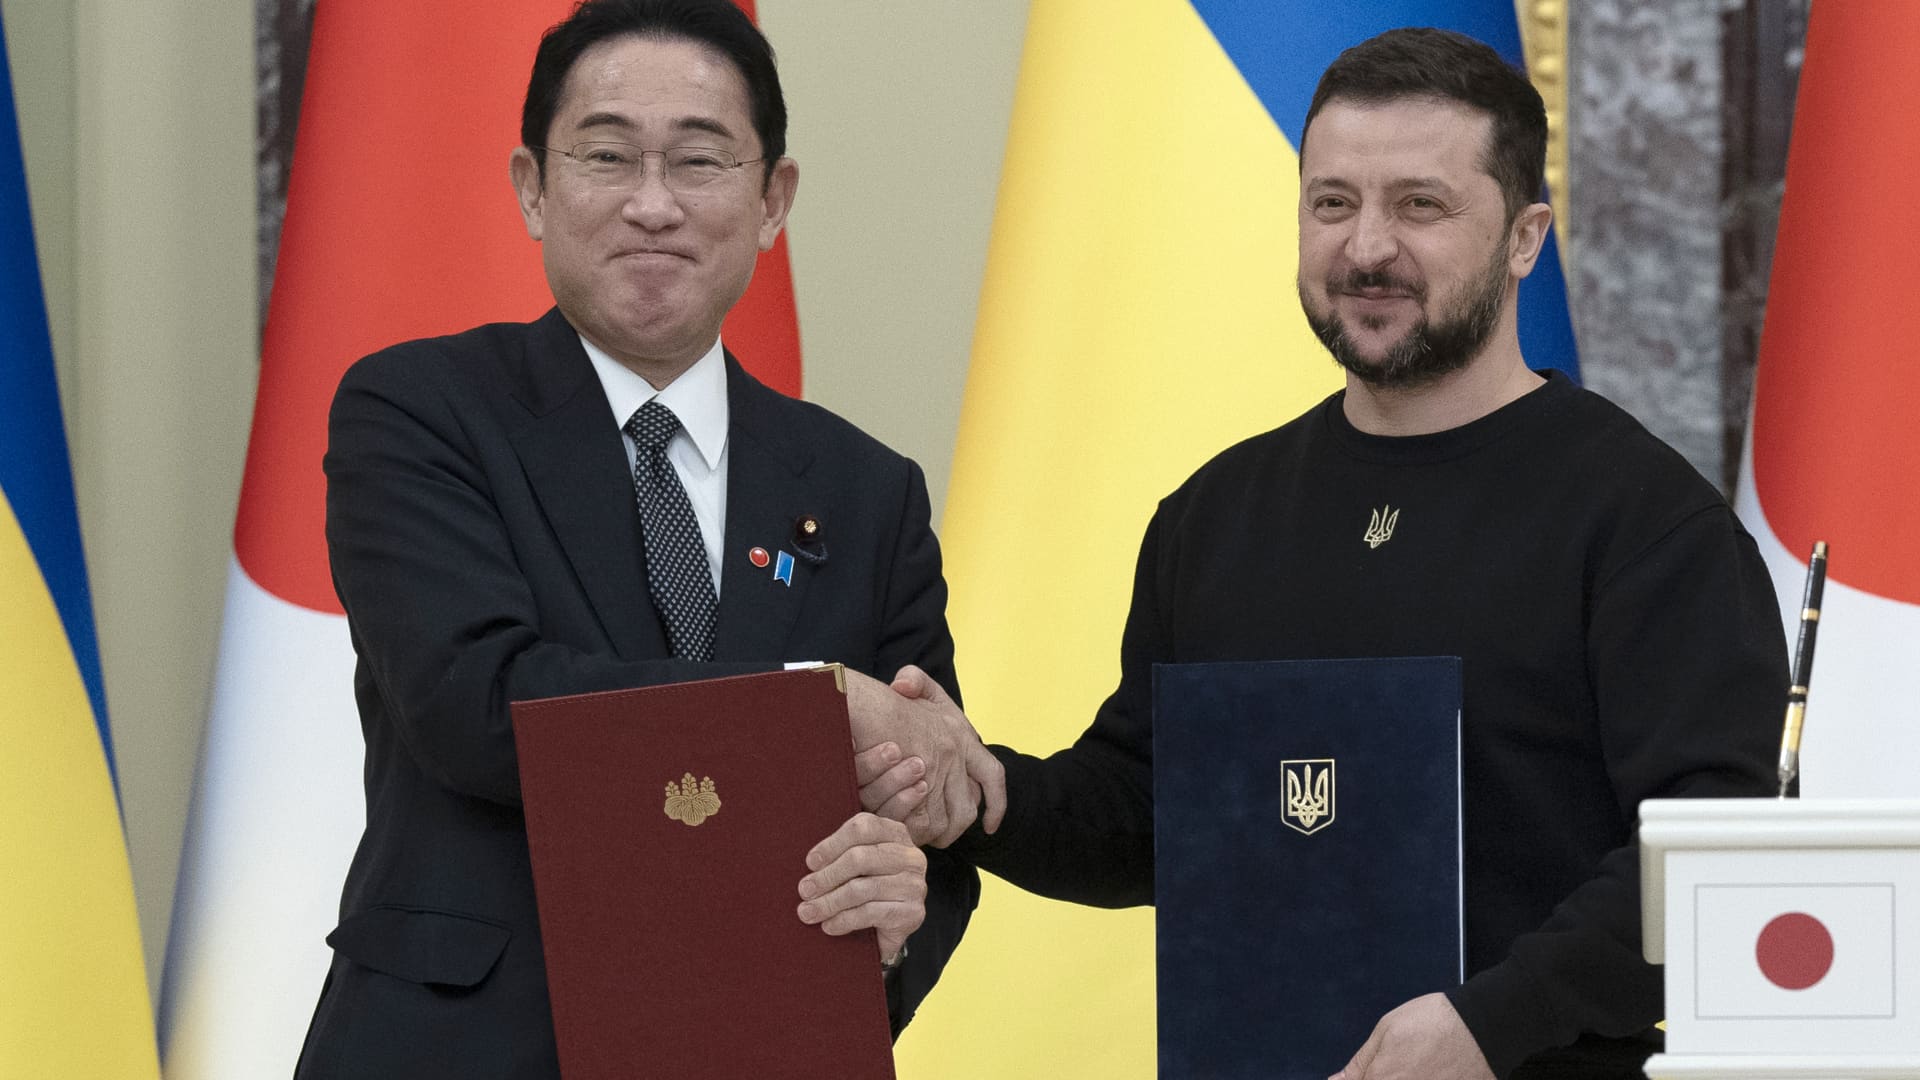 Fumio Kishida, Japan's prime minister, left, and Volodymyr Zelenskiy, Ukraine's president, shake hands during a news conference at the president's residence, known as Mariinsky Palace, in Kyiv, Ukraine, on Tuesday, March 21, 2023.